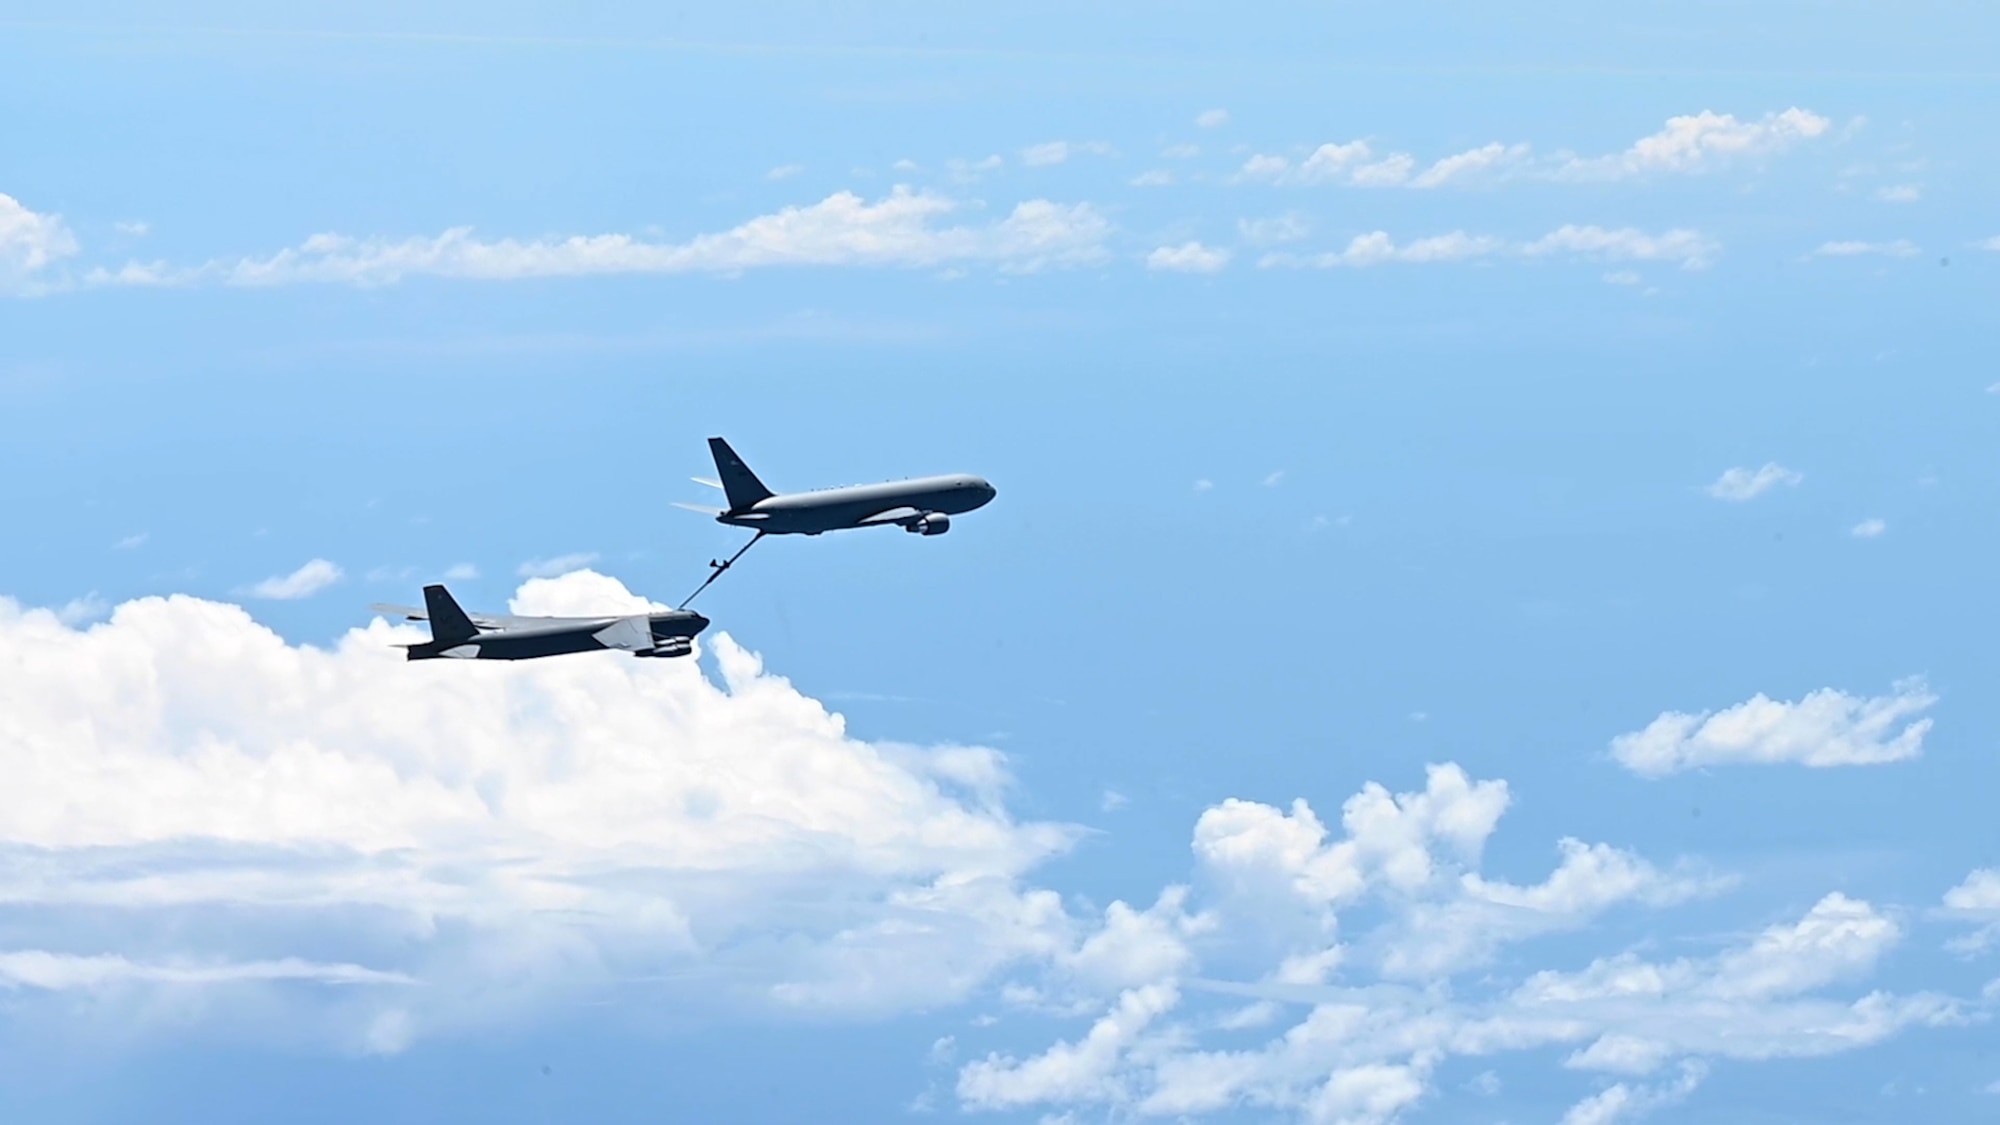 A KC-46 Pegasus assigned to the 418th Flight Test Squadron conducts an air refueling test mission with a Boeing B-52 Stratofortress over the skies of Southern California. Receivers come in many types of aircraft depending on this mission.